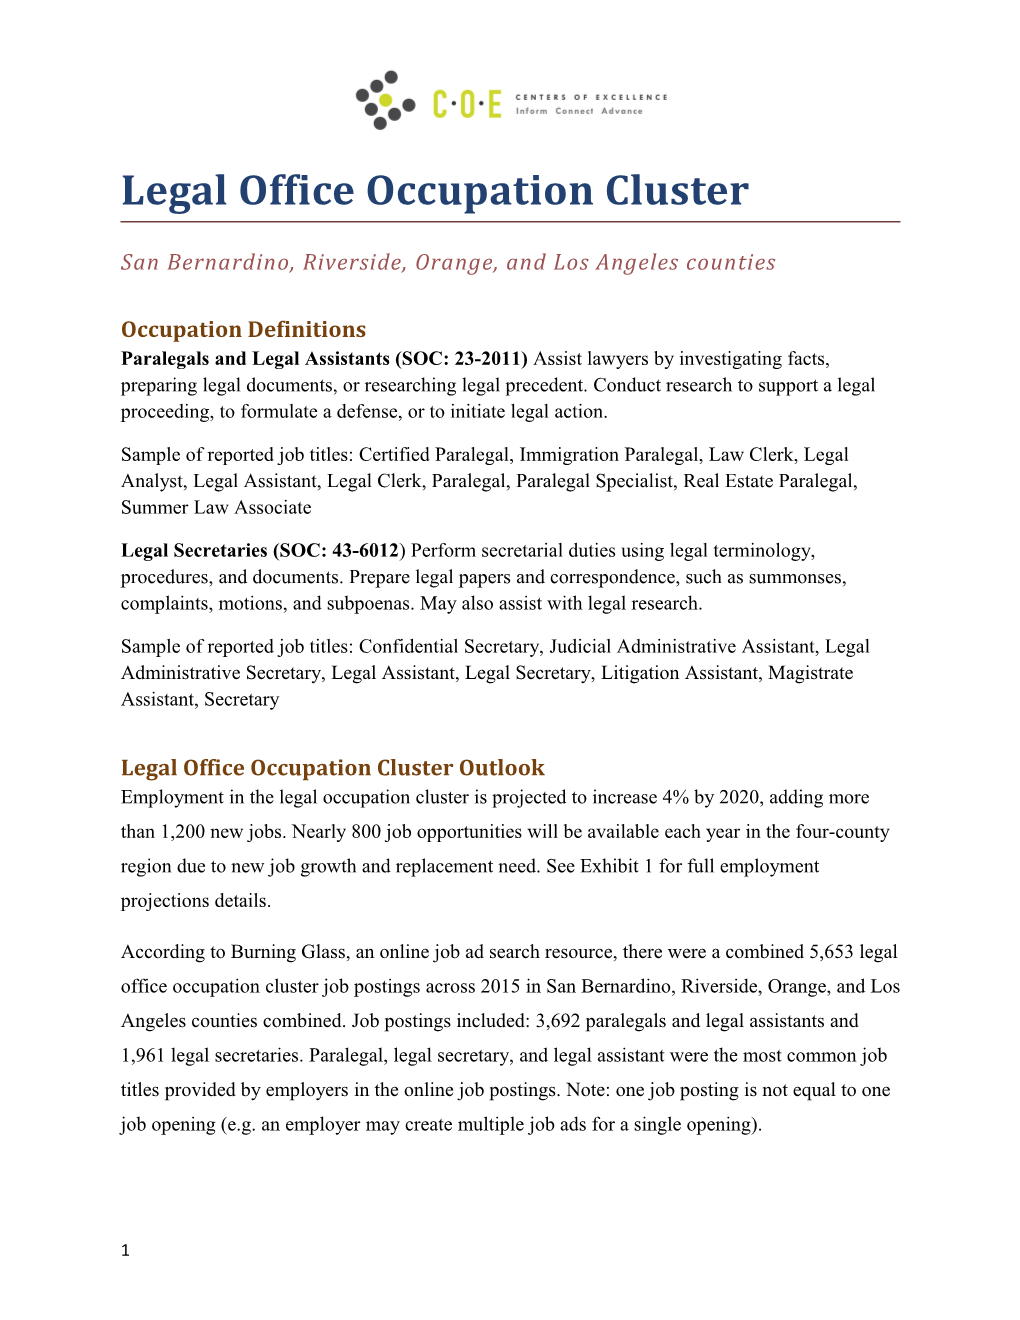 Legal Office Occupation Cluster